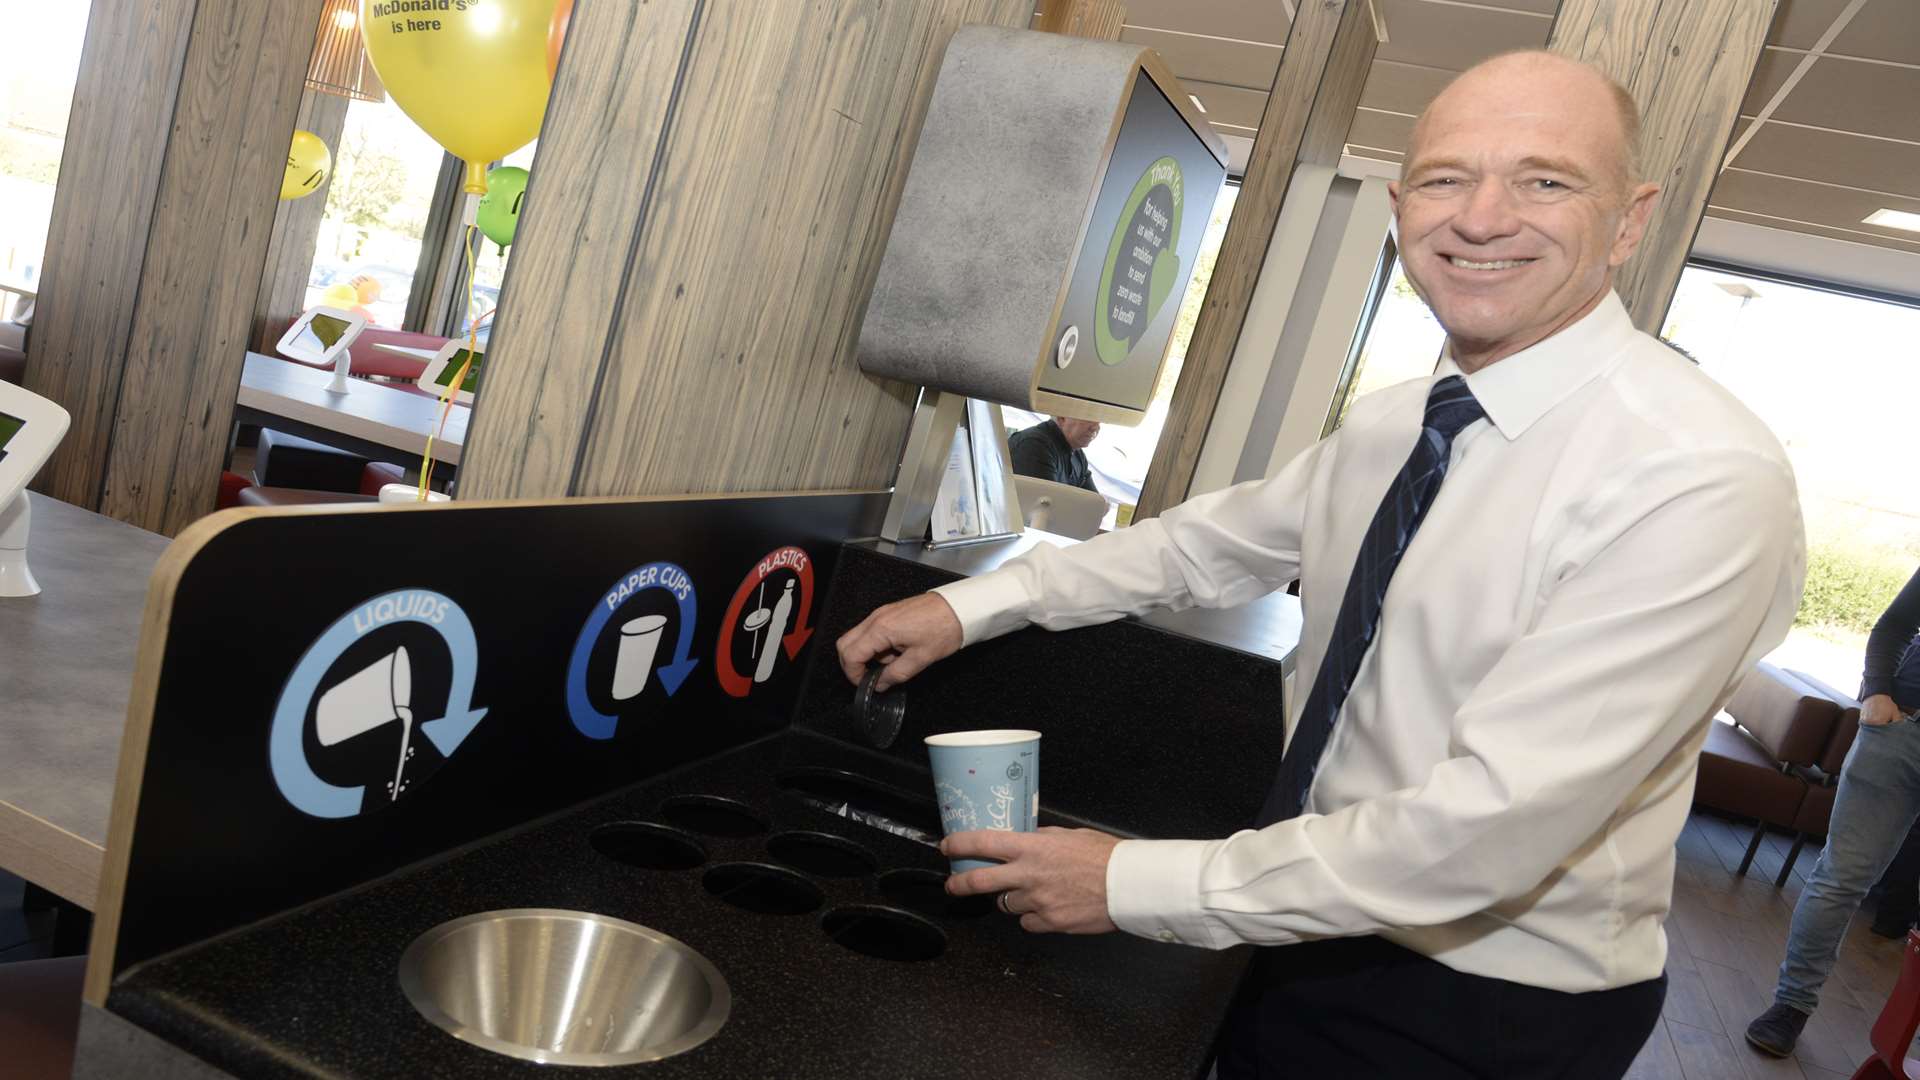 Franchise holder Paul Crocker at the recycling centre in his newly refurbished Chestfield McDonald's.